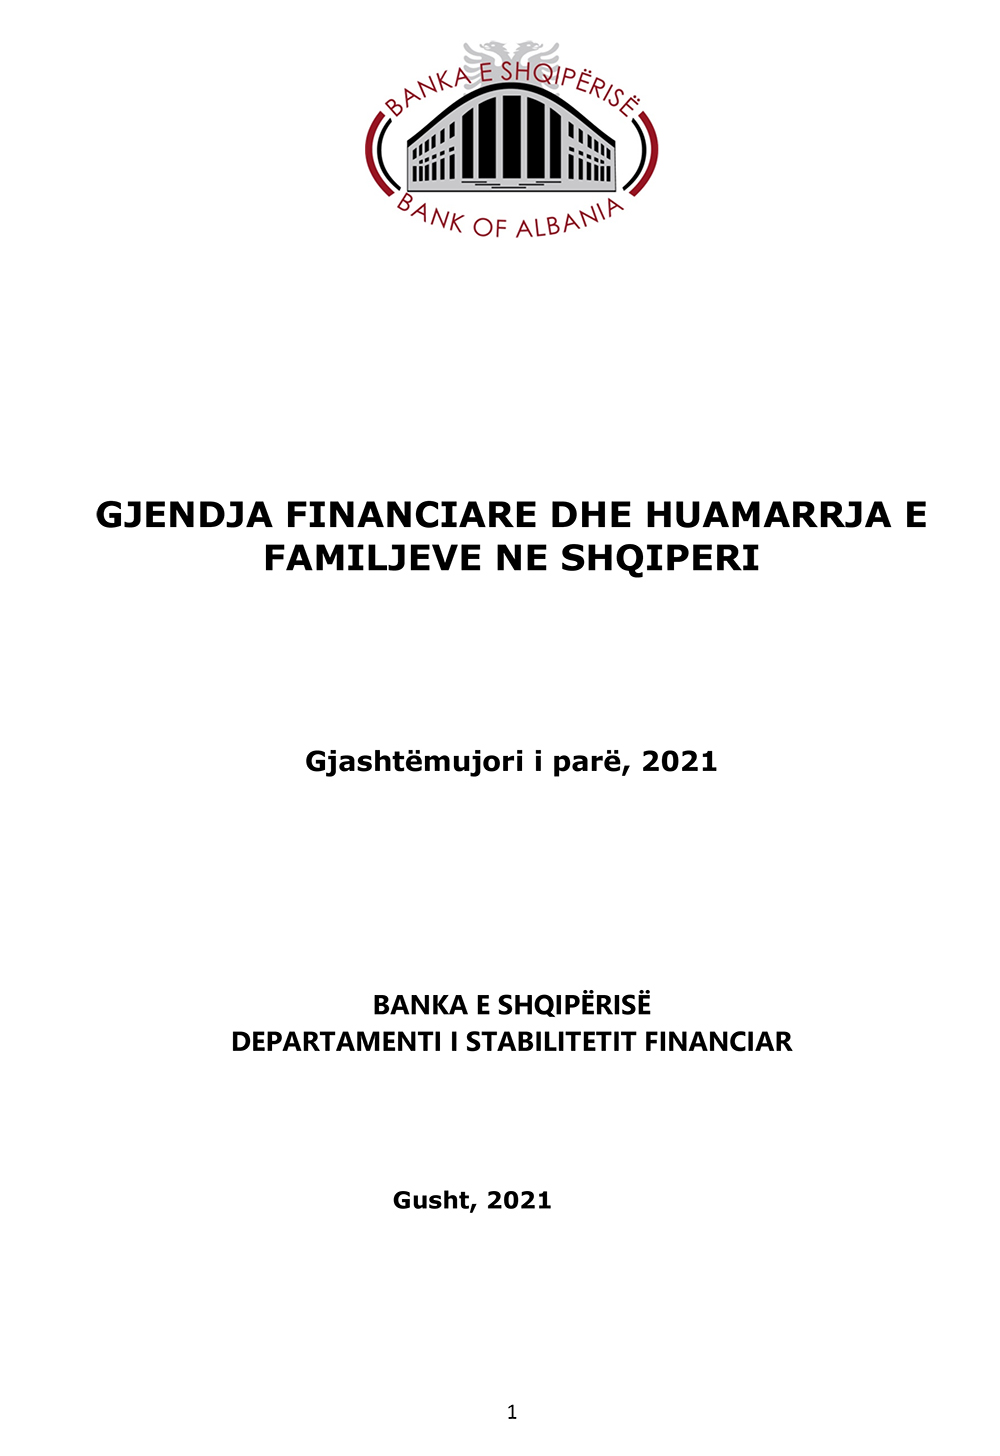 Survey on Financial Situation and Borrowing of Households in Albania- 2021 H1